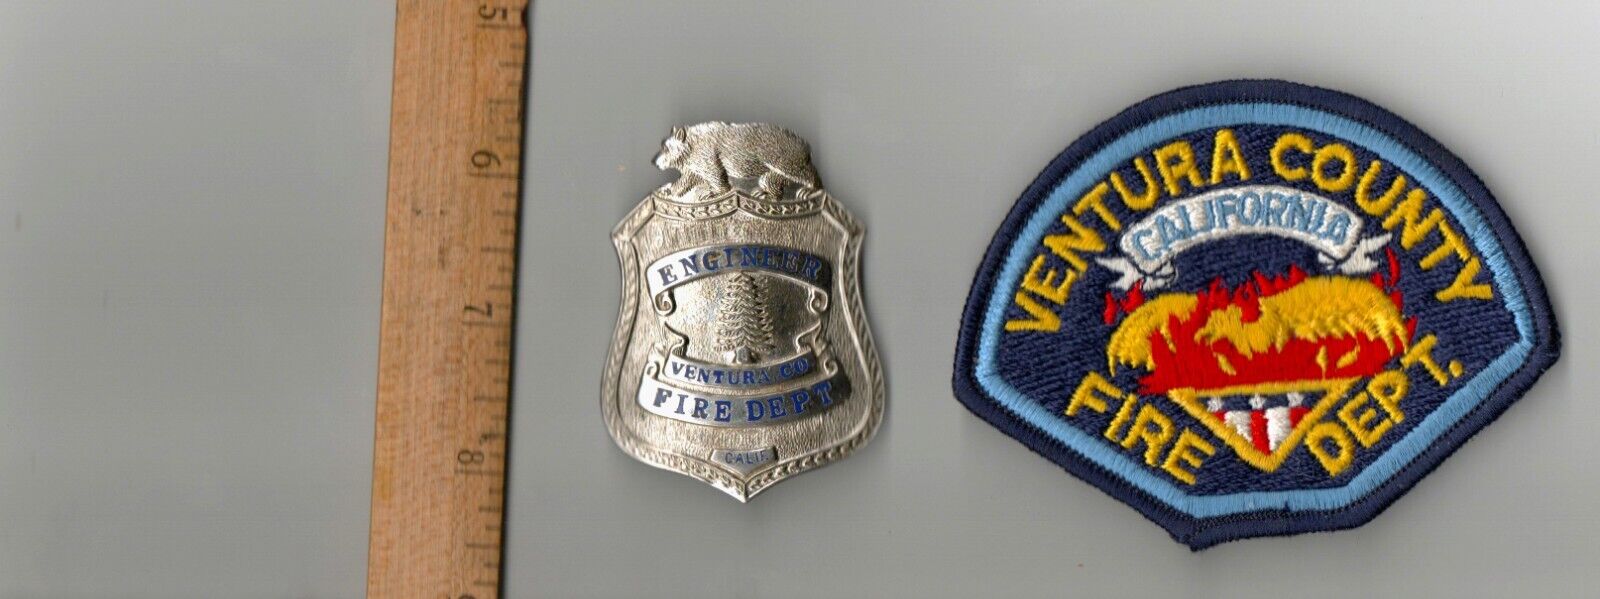 Ventura County Fire Department Engineer obsolete style badge and patch